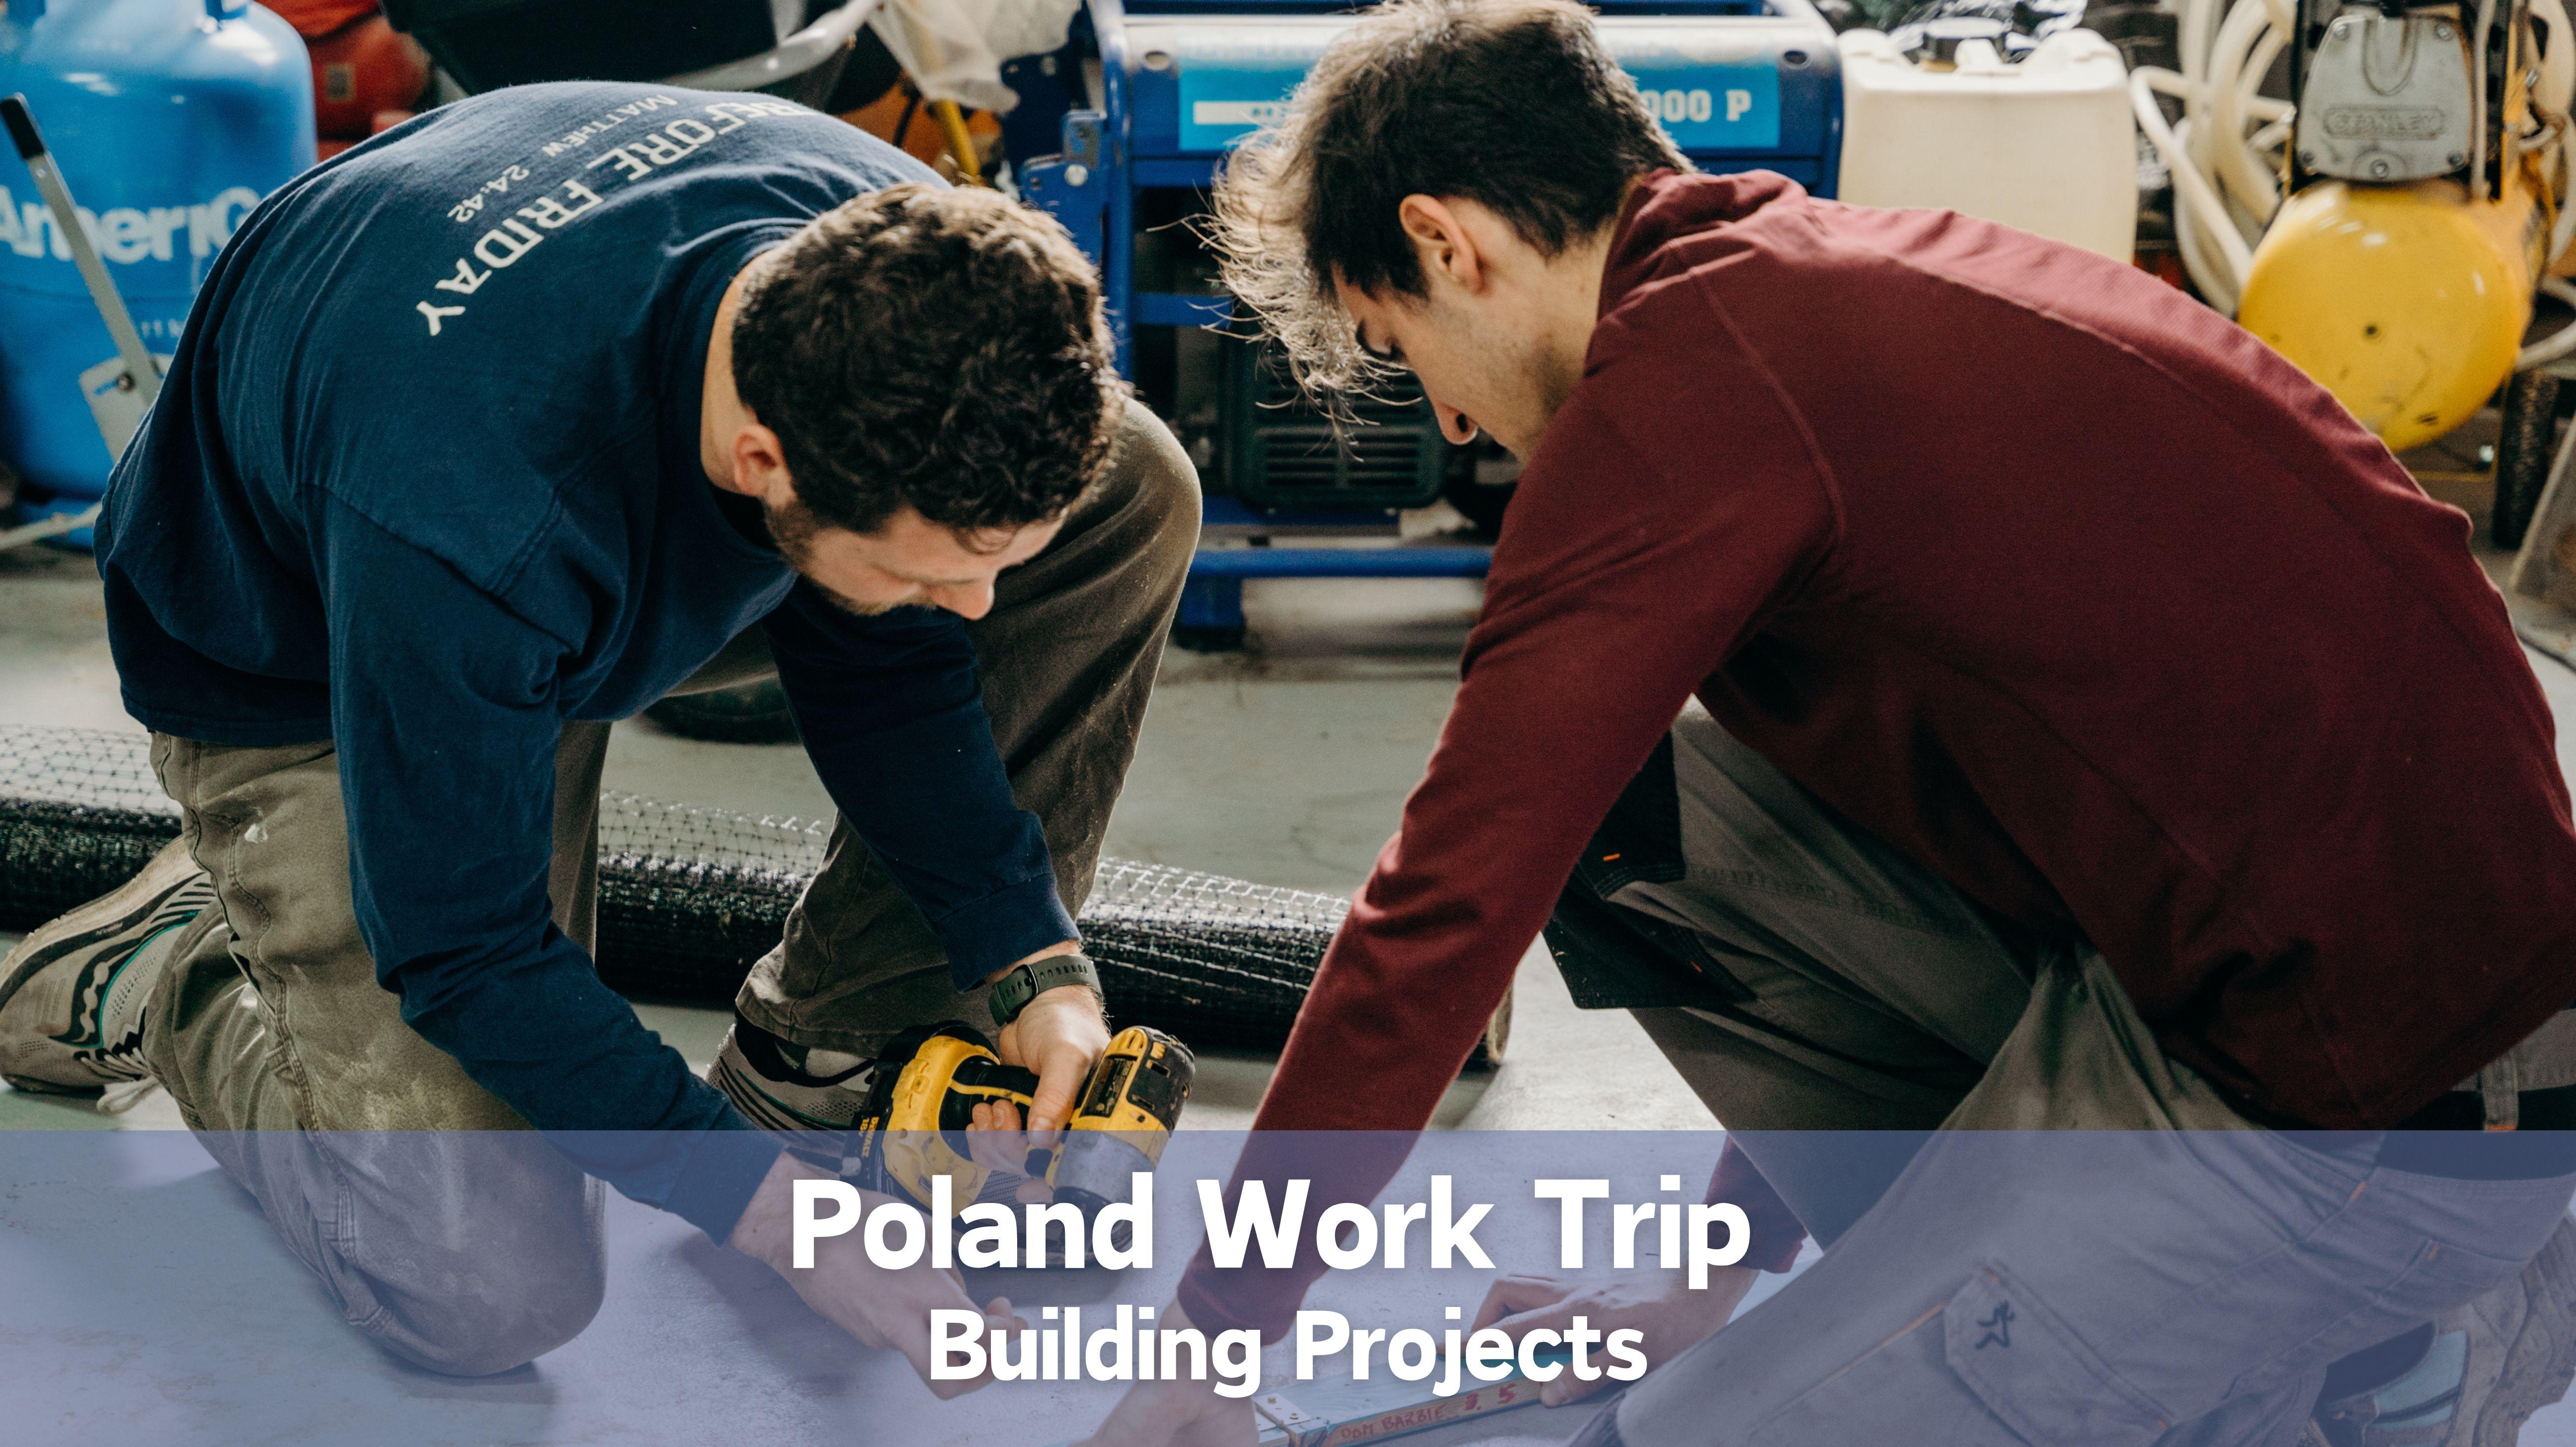 Poland Work Trip - Building Projects